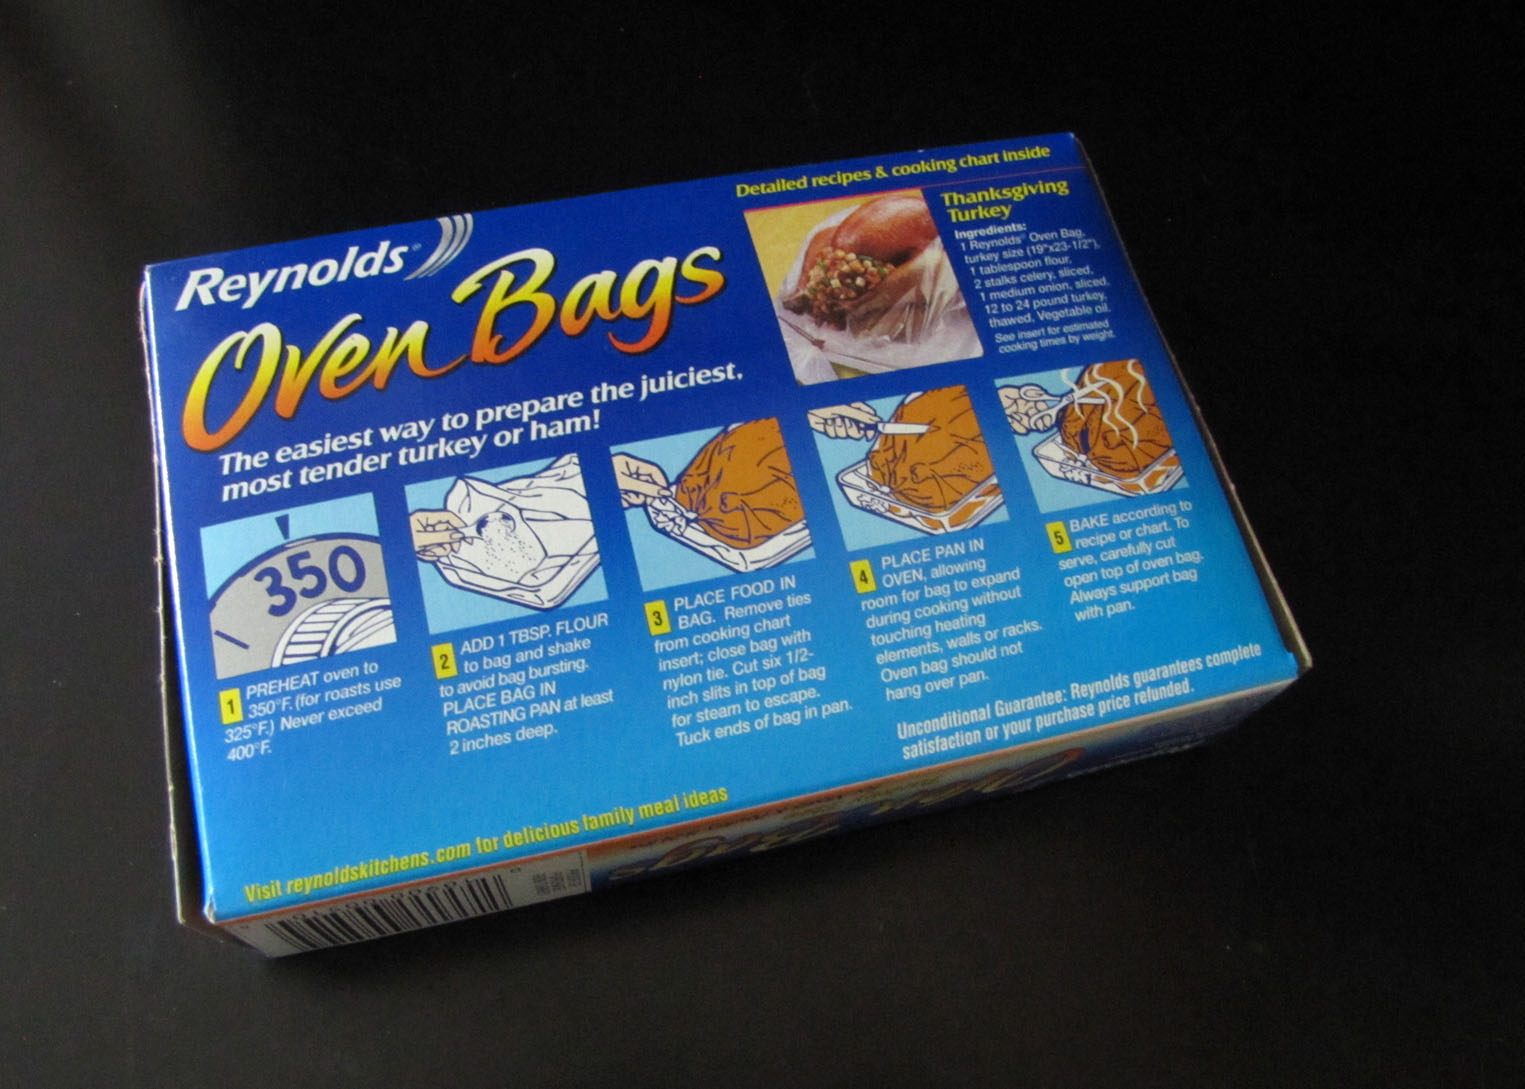 How To Cook a Turkey In A Bag (Reynolds Oven Bags) - Roast Turkey